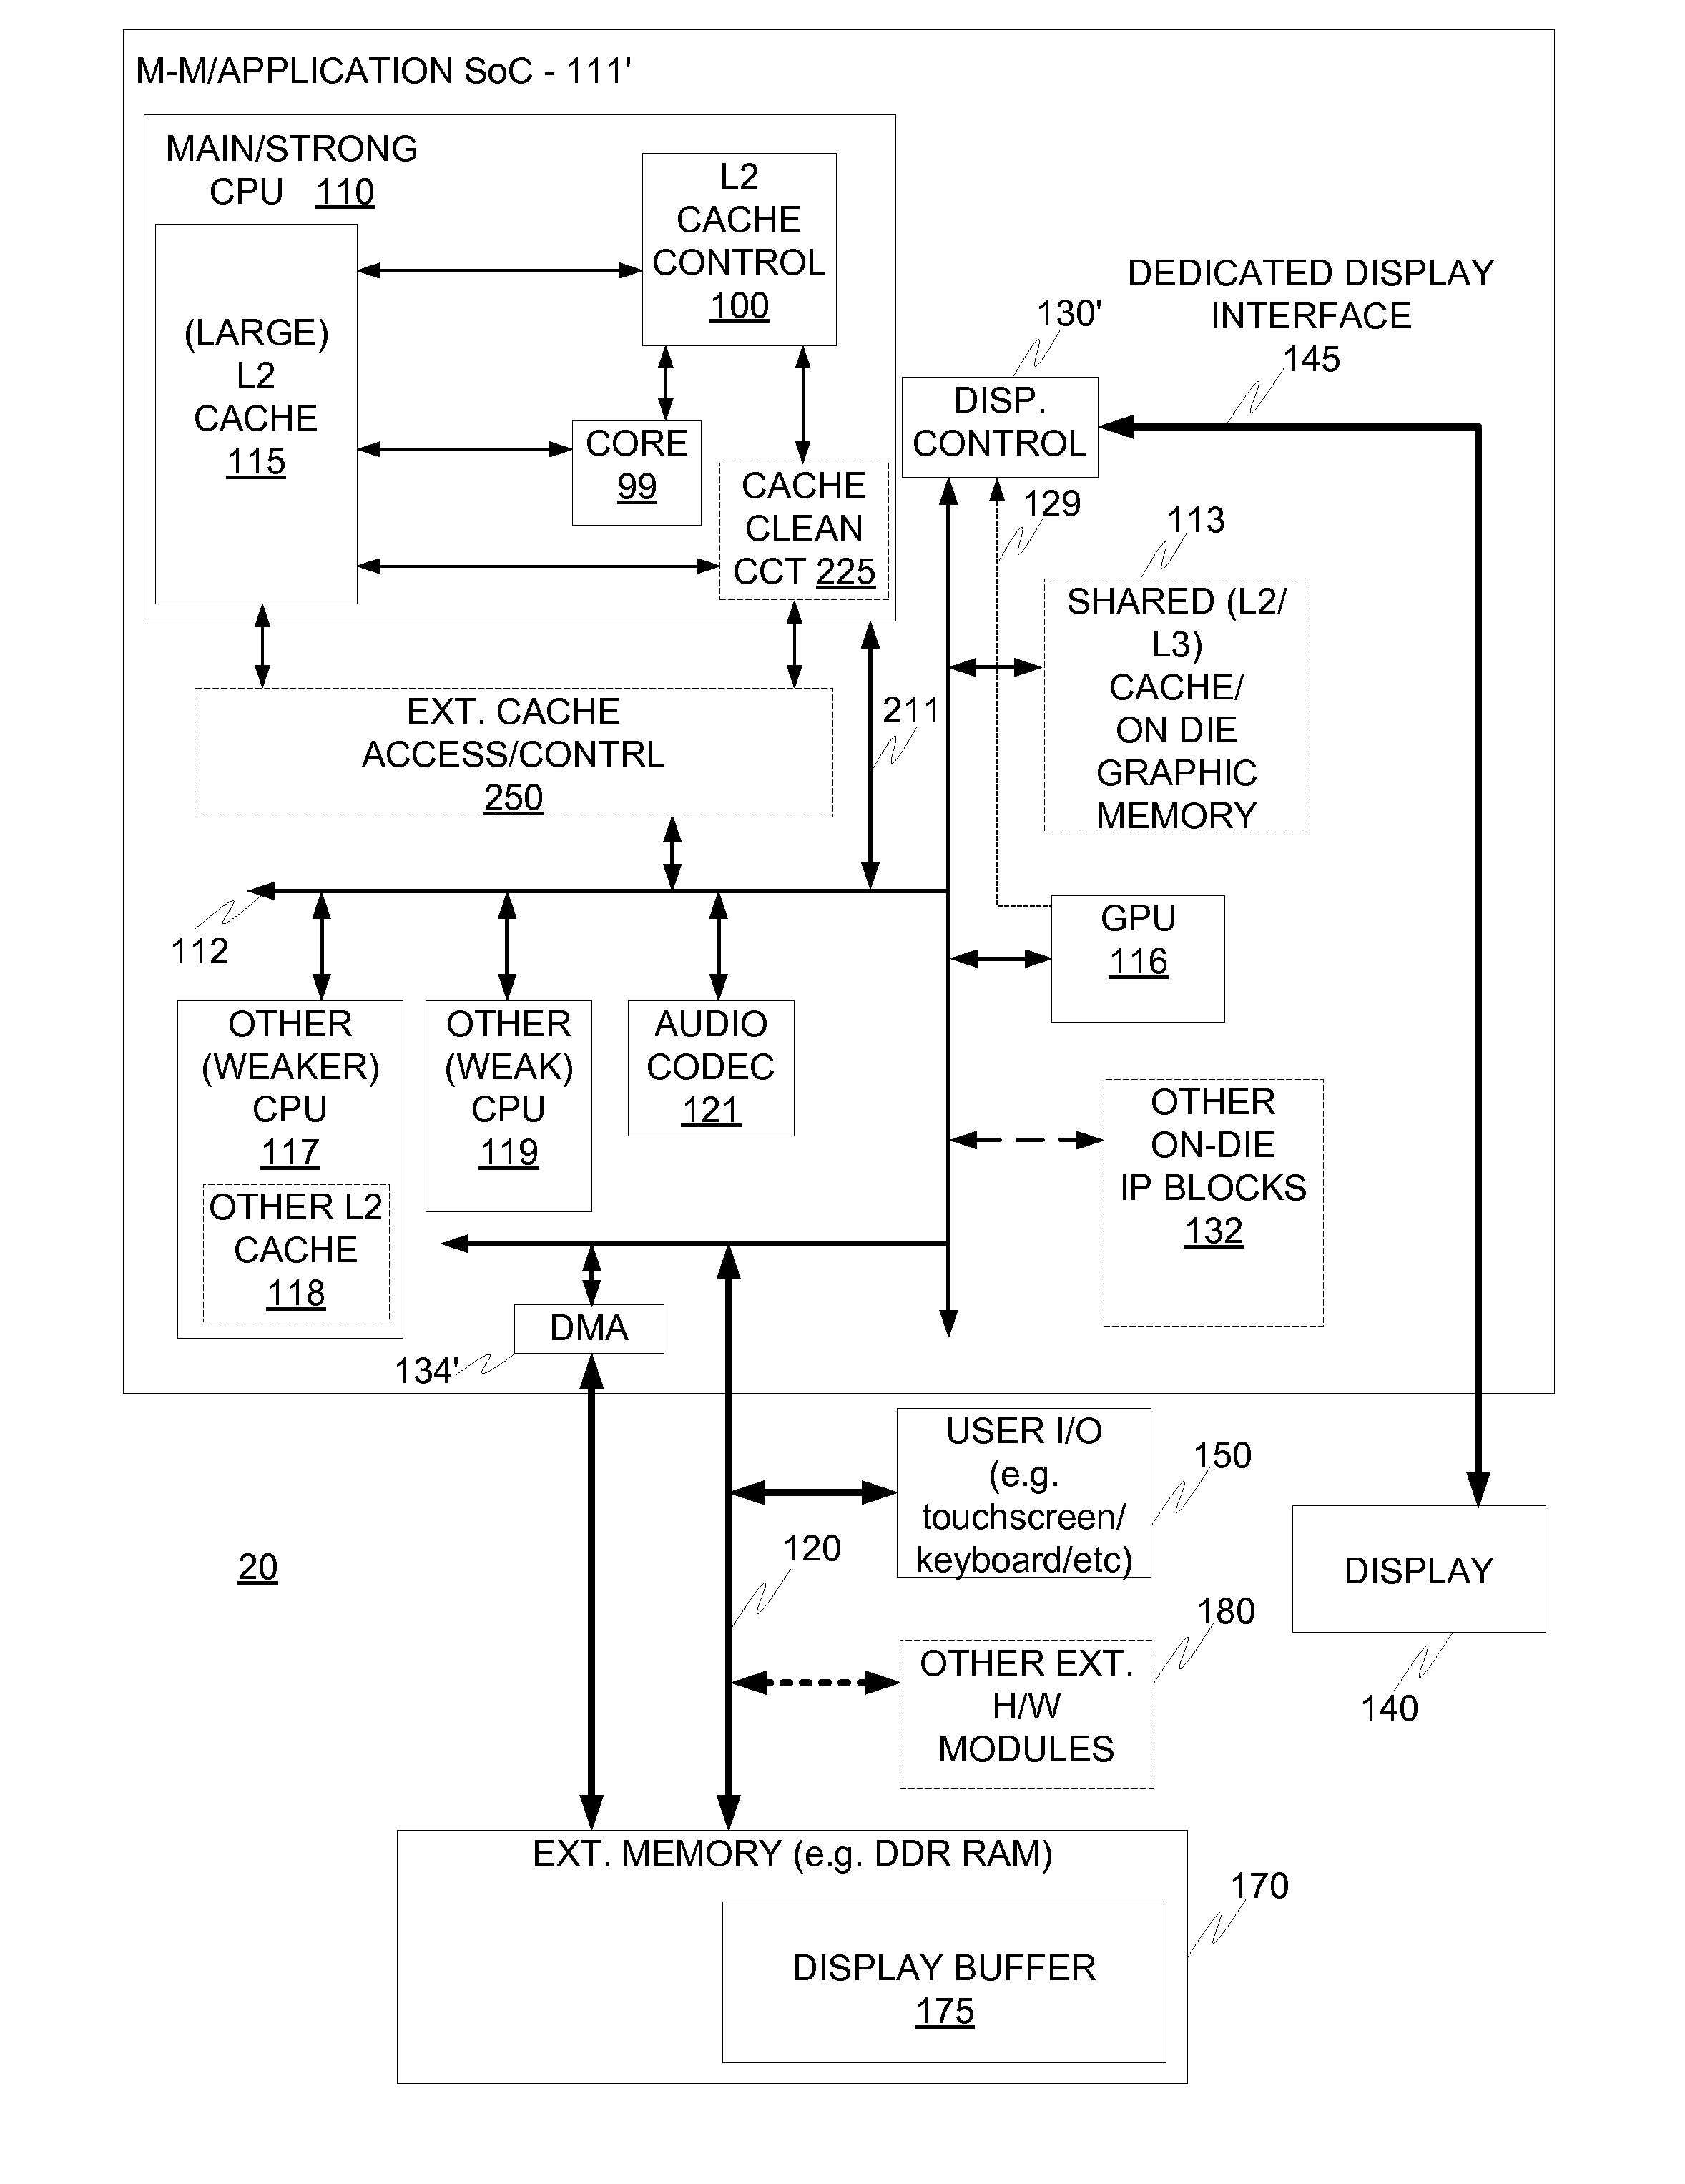 A method and apparatus for using a CPU cache memory for non-CPU related tasks